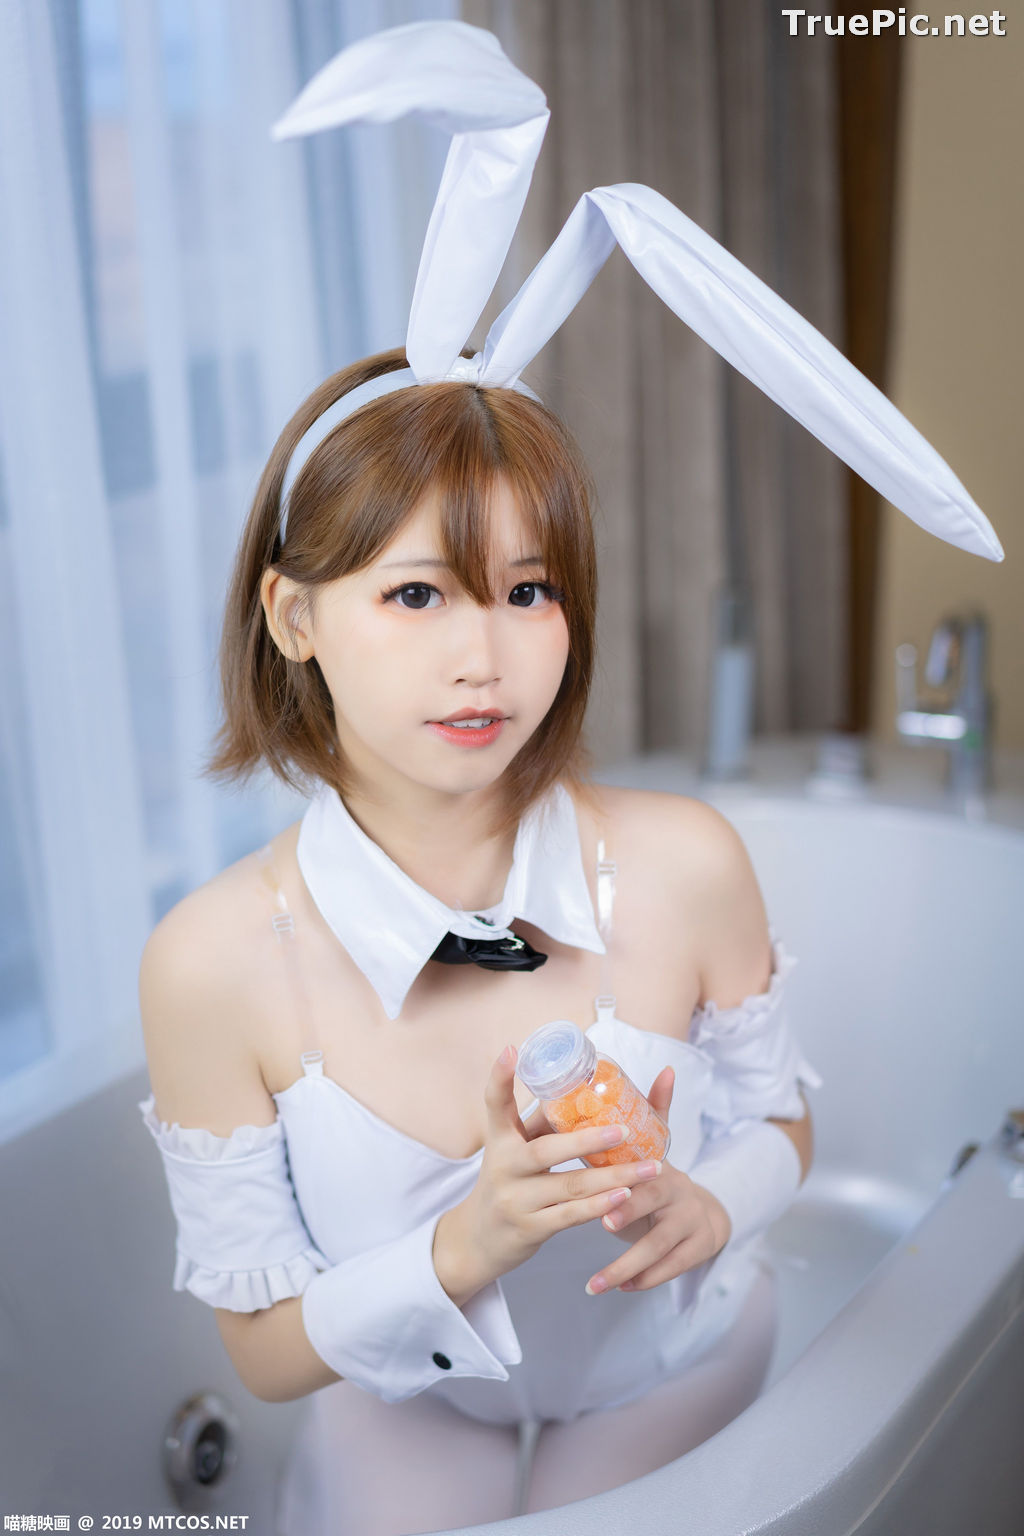 Image [MTCos] 喵糖映画 Vol.041 – Chinese Cute Model – White Bunny Girl - TruePic.net - Picture-1